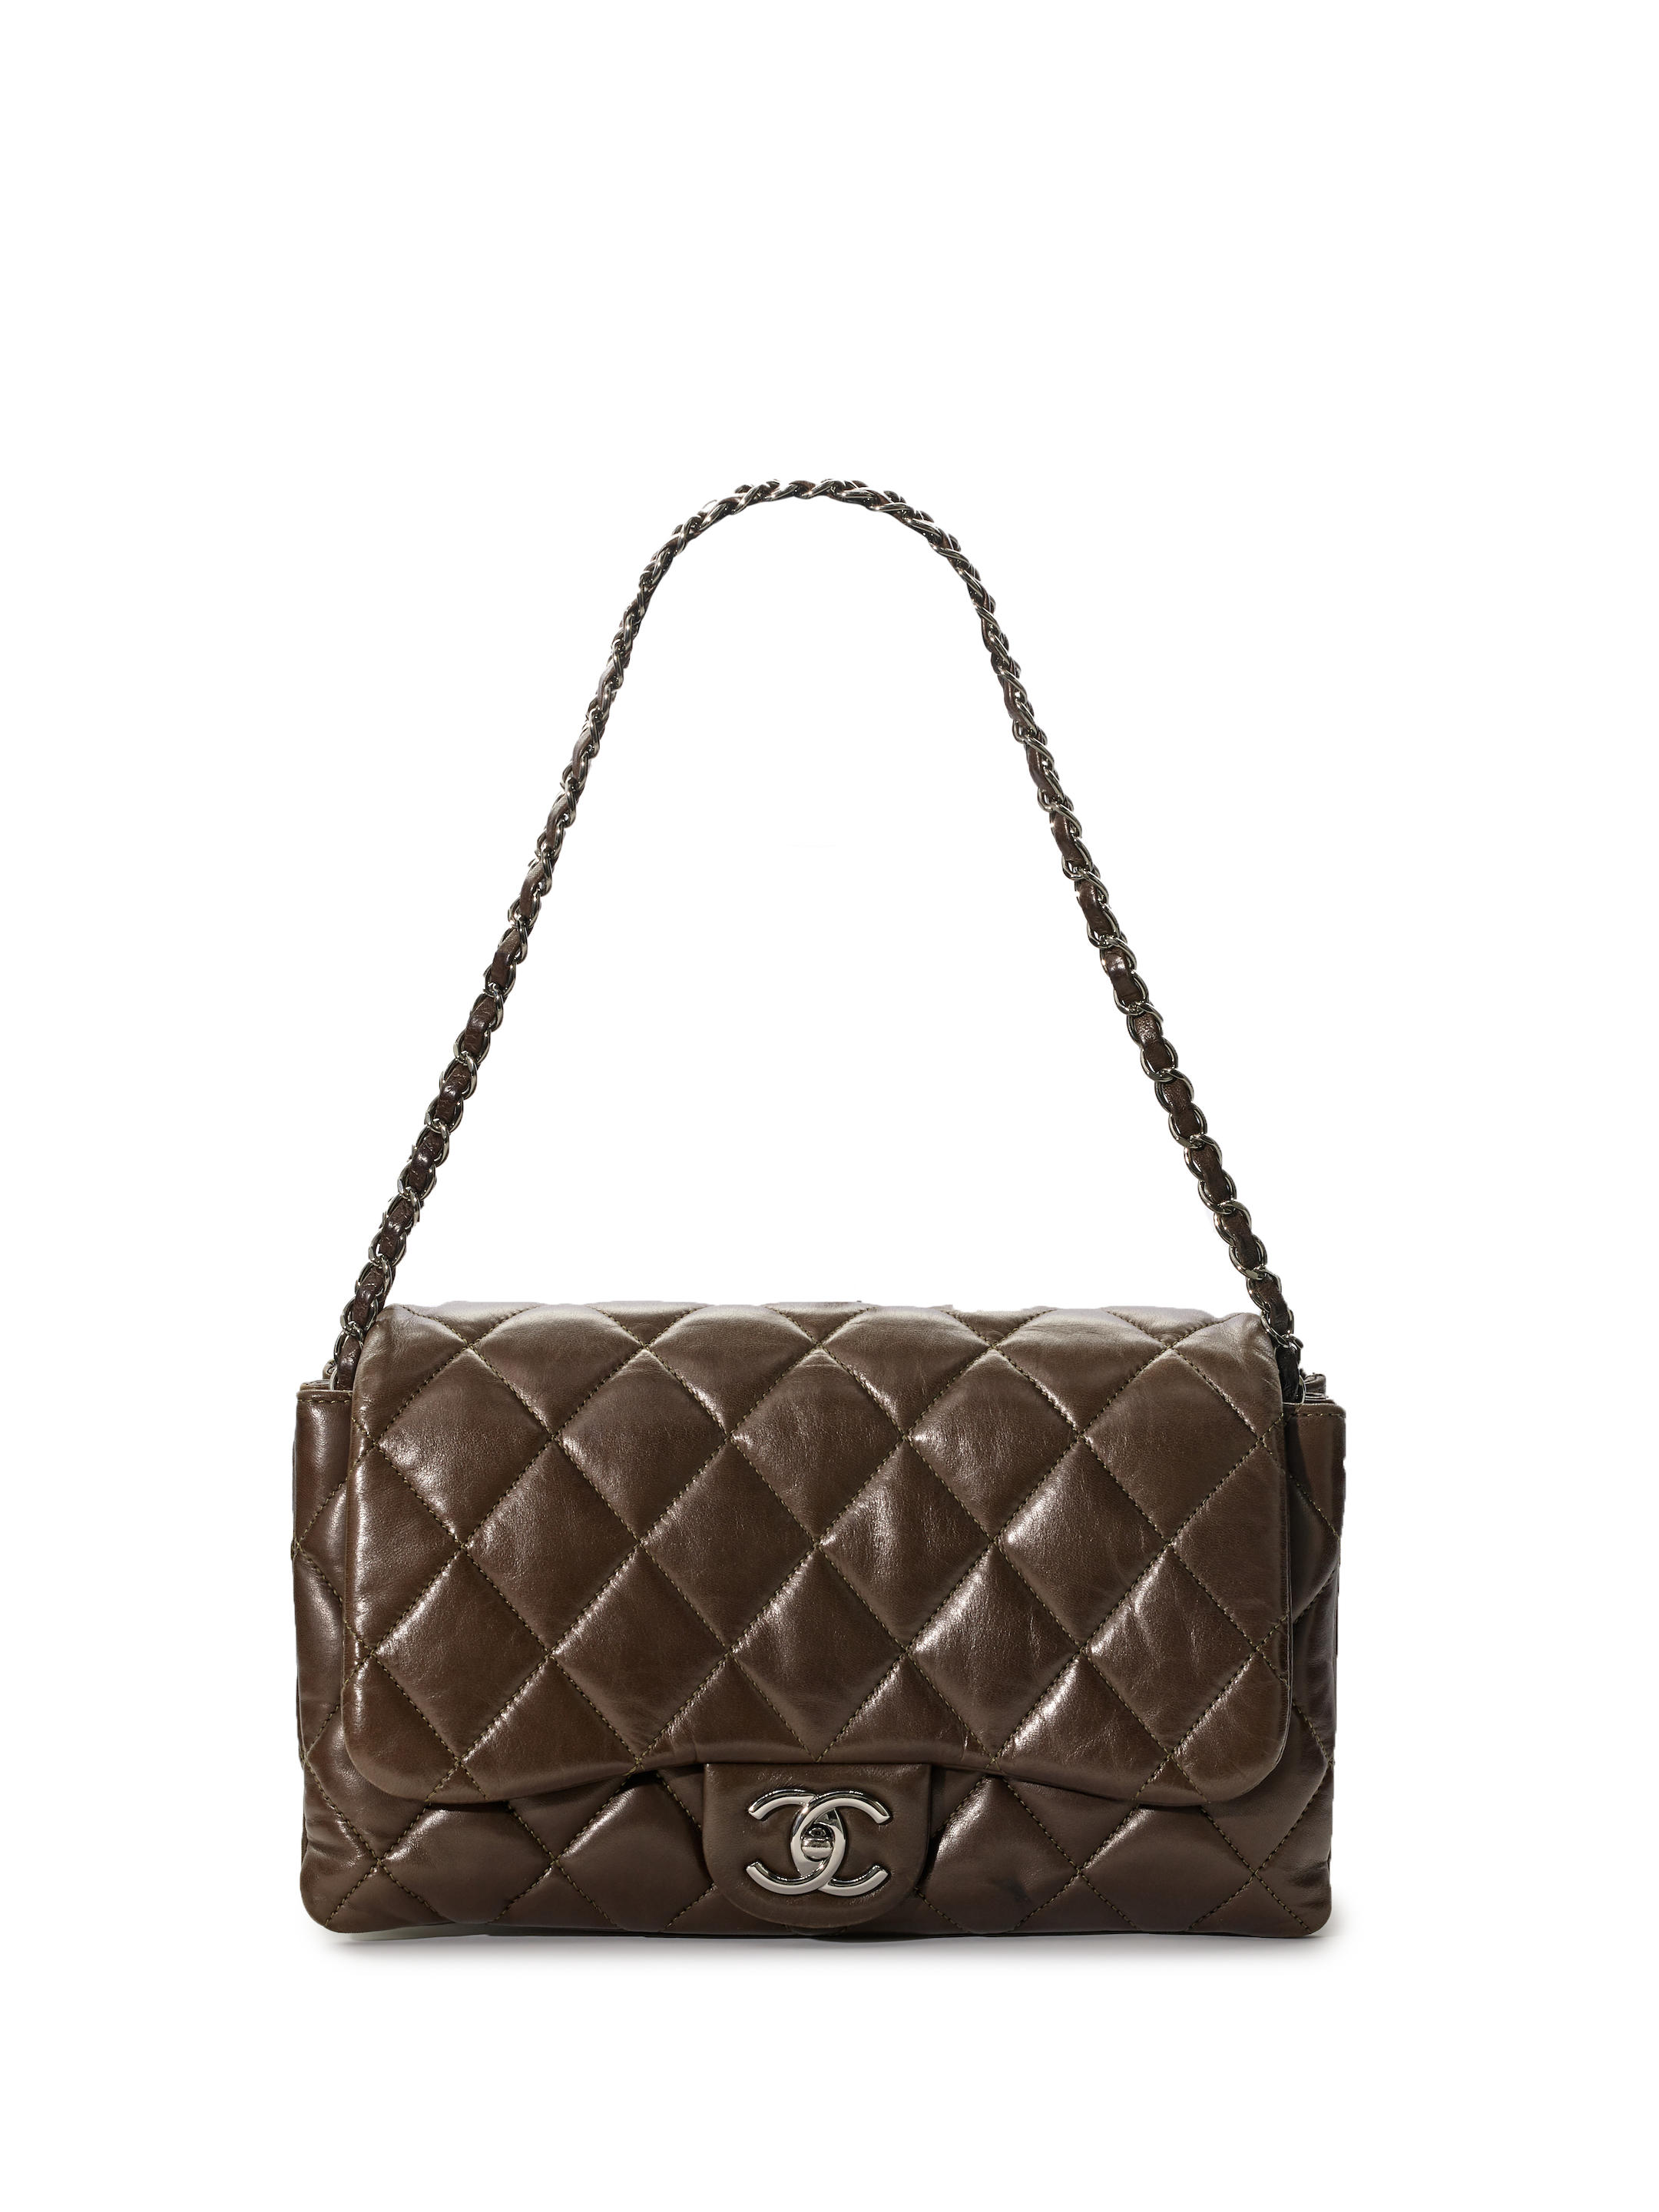 CHANEL BROWN LAMBSKIN QUILTED CLASSIC FLAP  - Bonhams